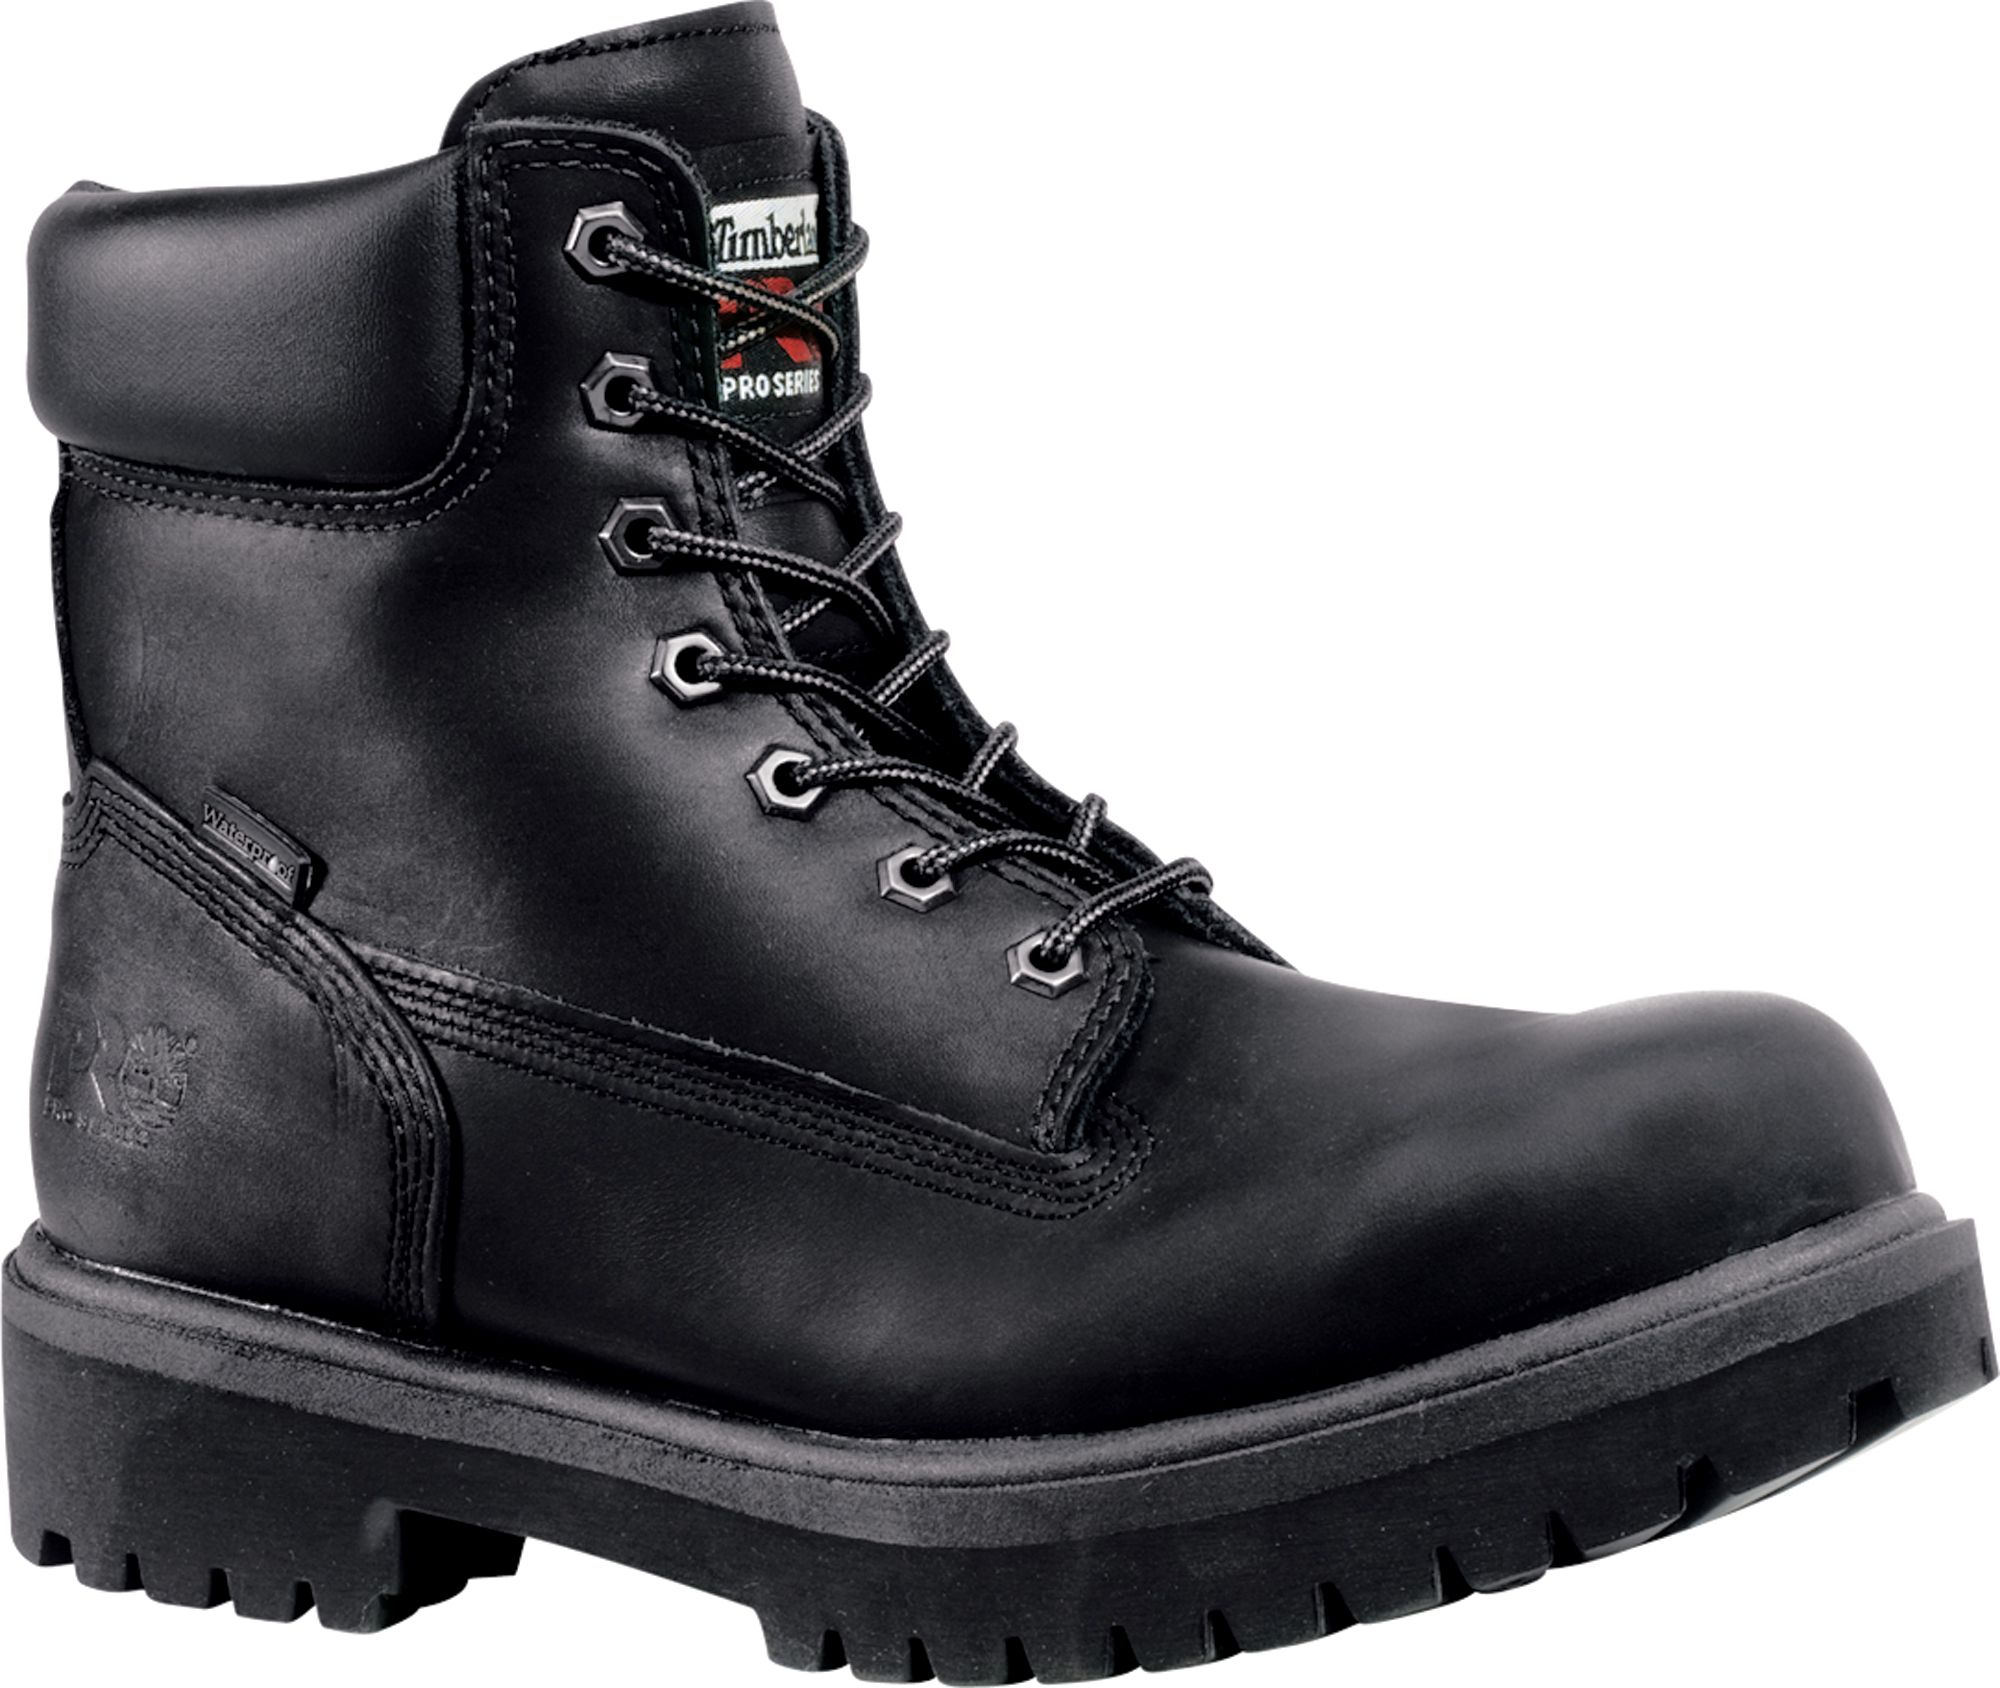 sports direct work boots